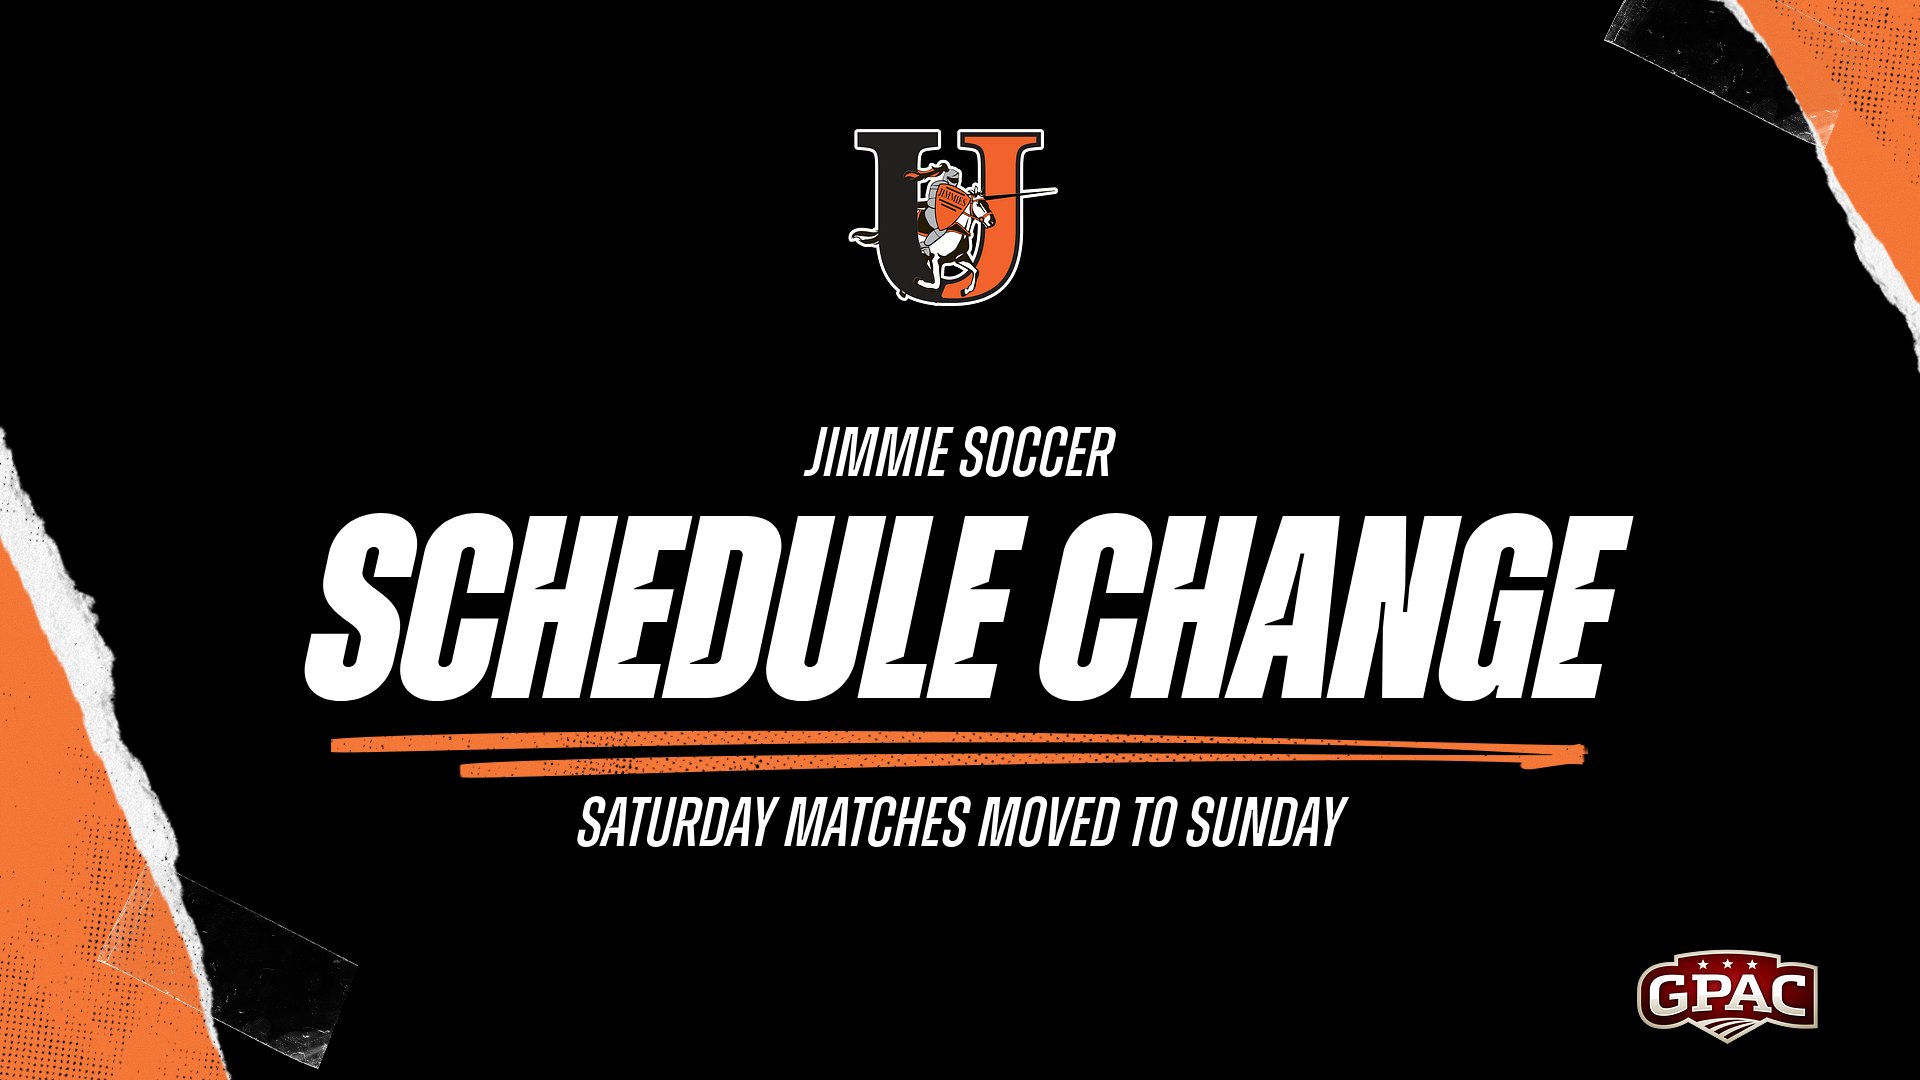 Saturday home matches against Doane moved to Sunday